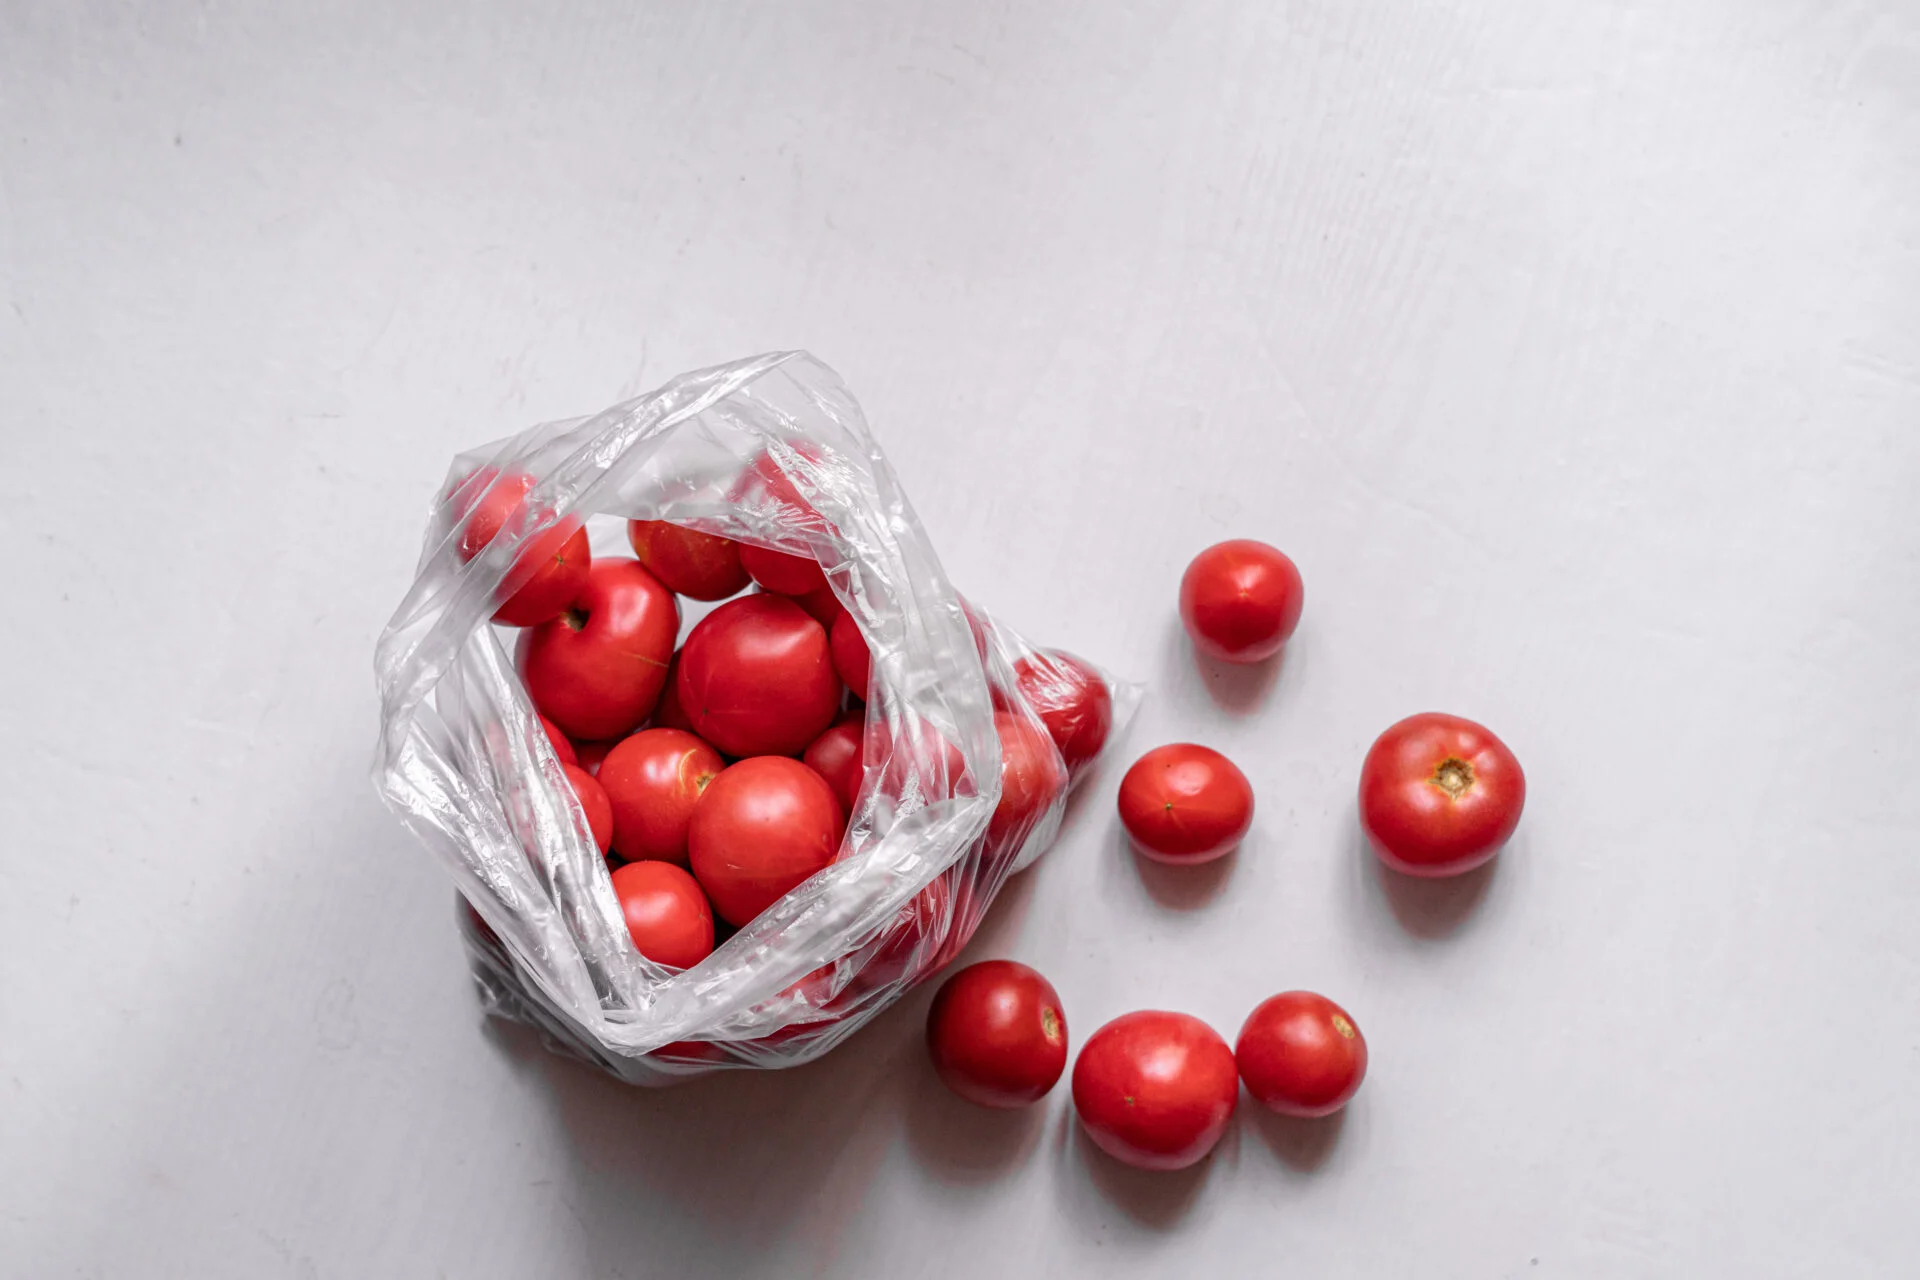 a top view of many red tomatoes in the plastic package begs, the plastic issue